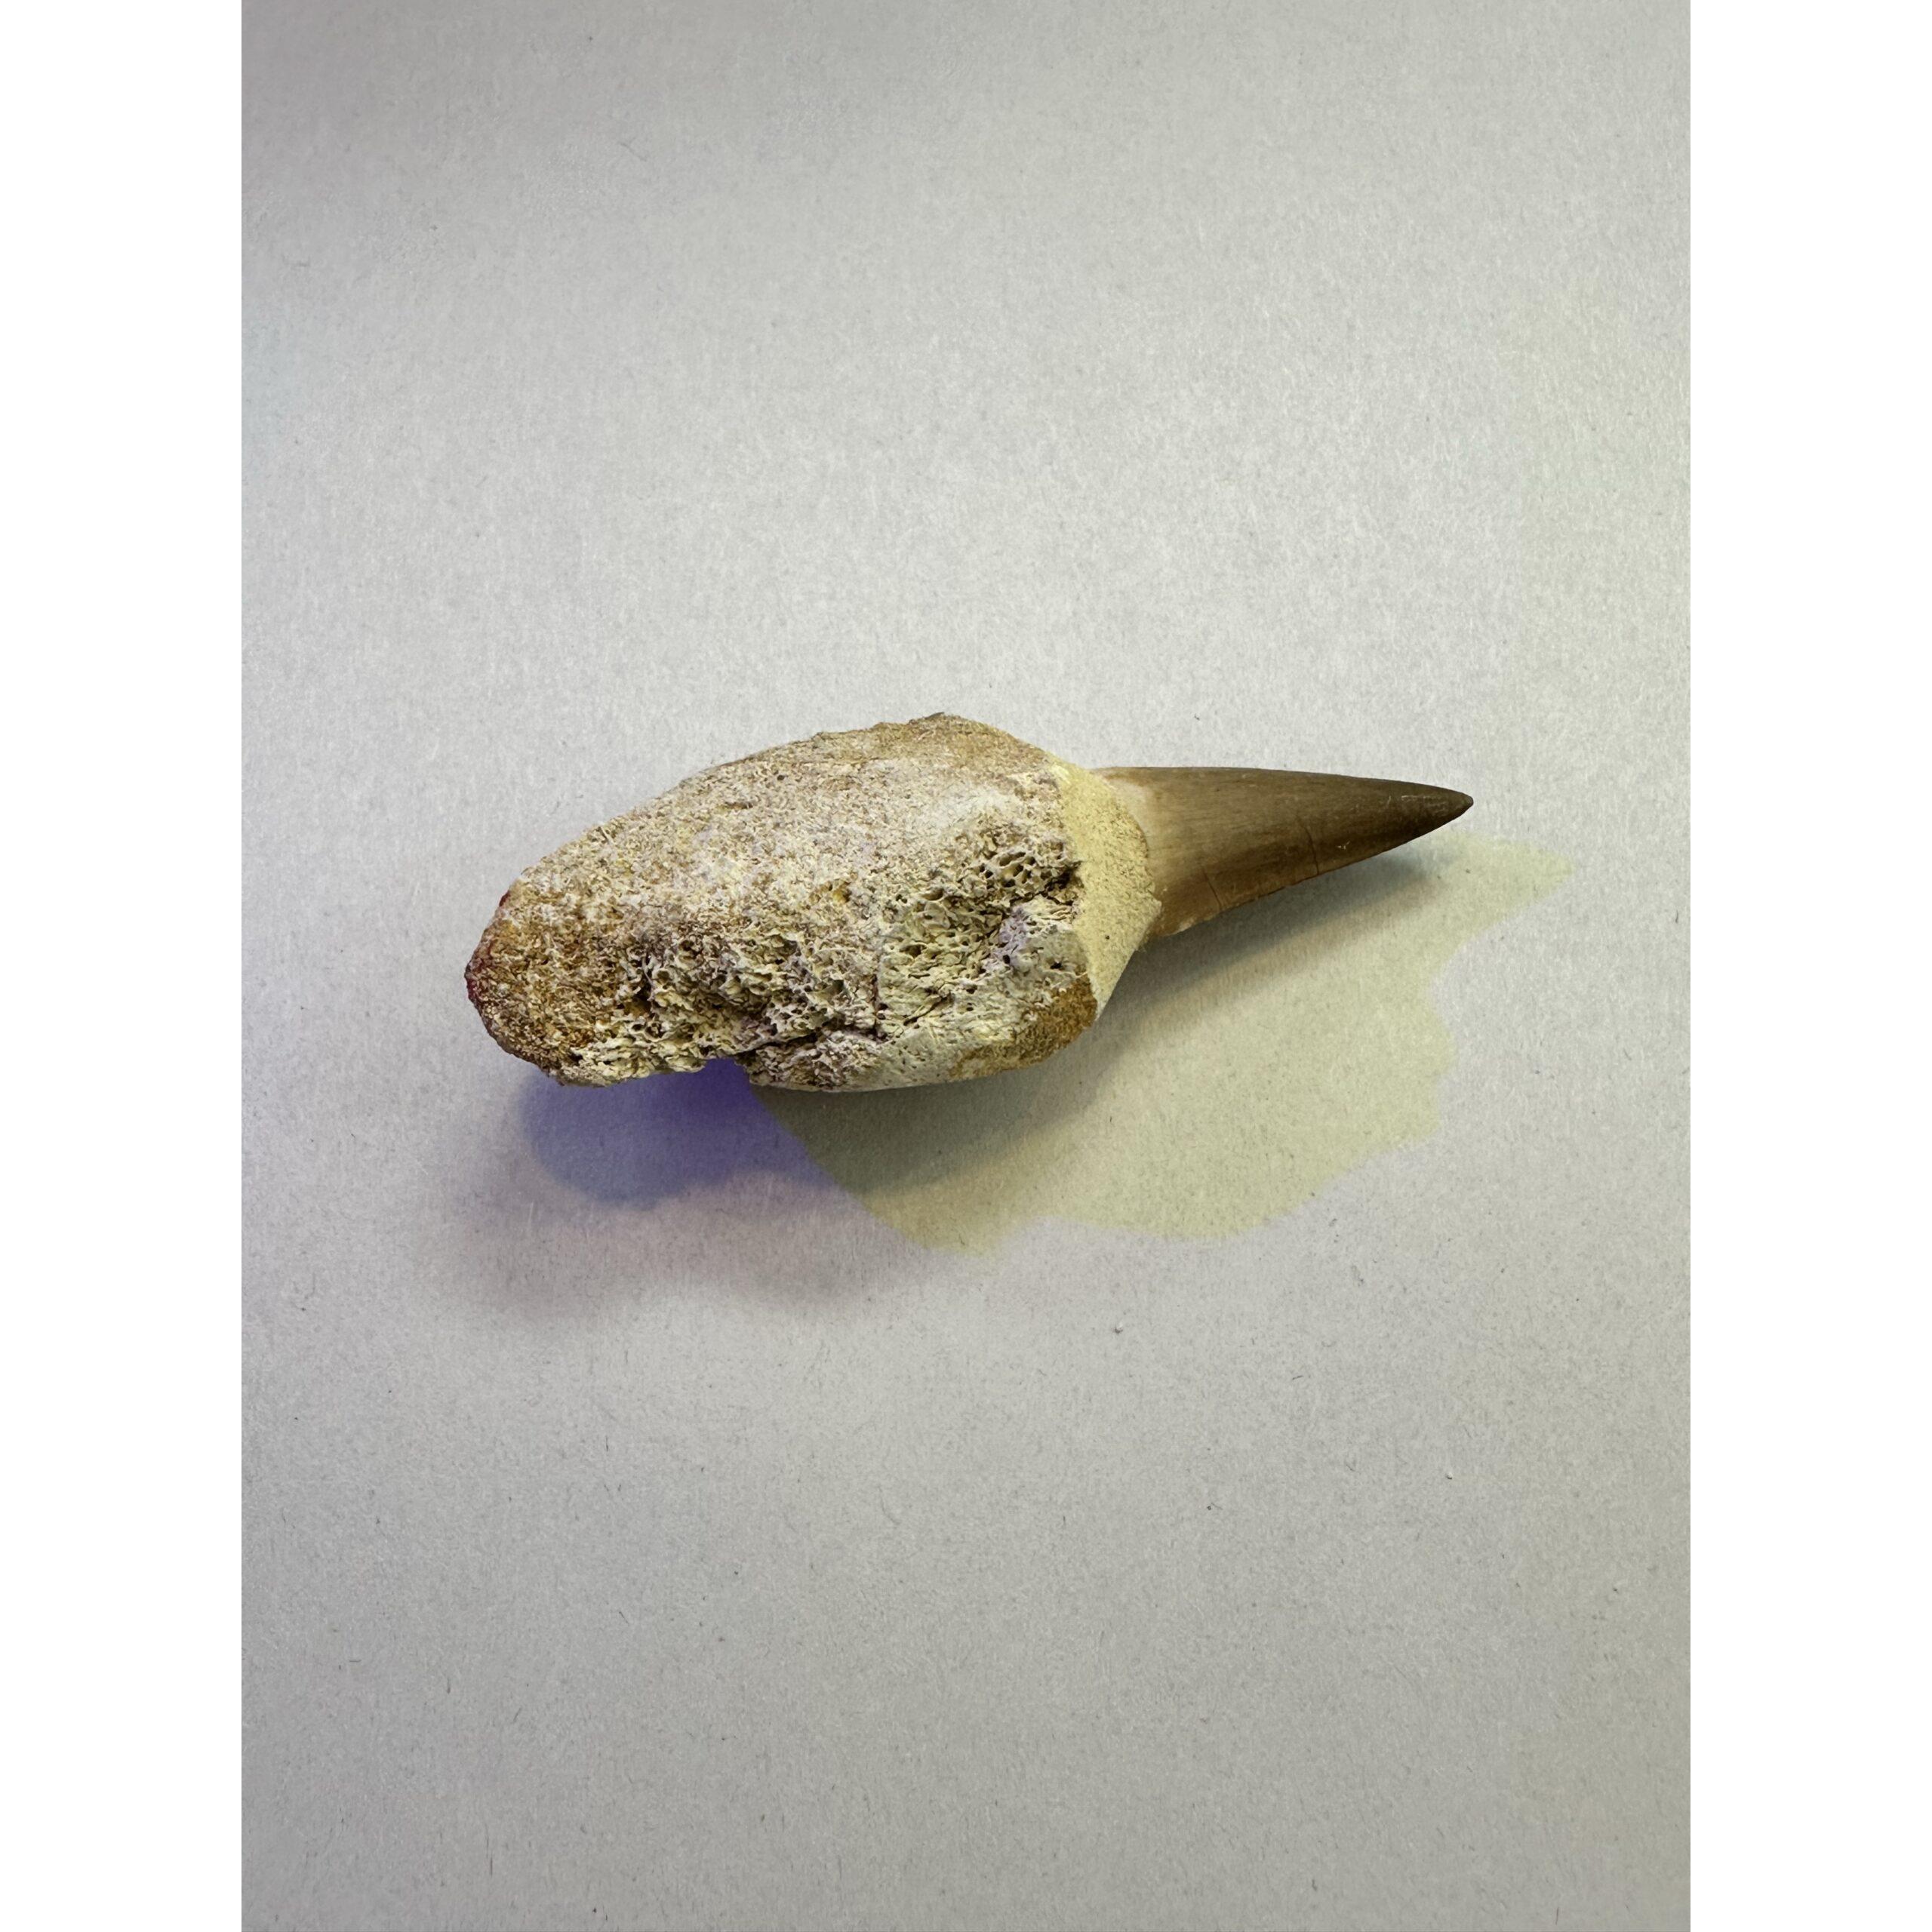 Mosasaurus tooth with root, Beautiful 3 inches long Prehistoric Online